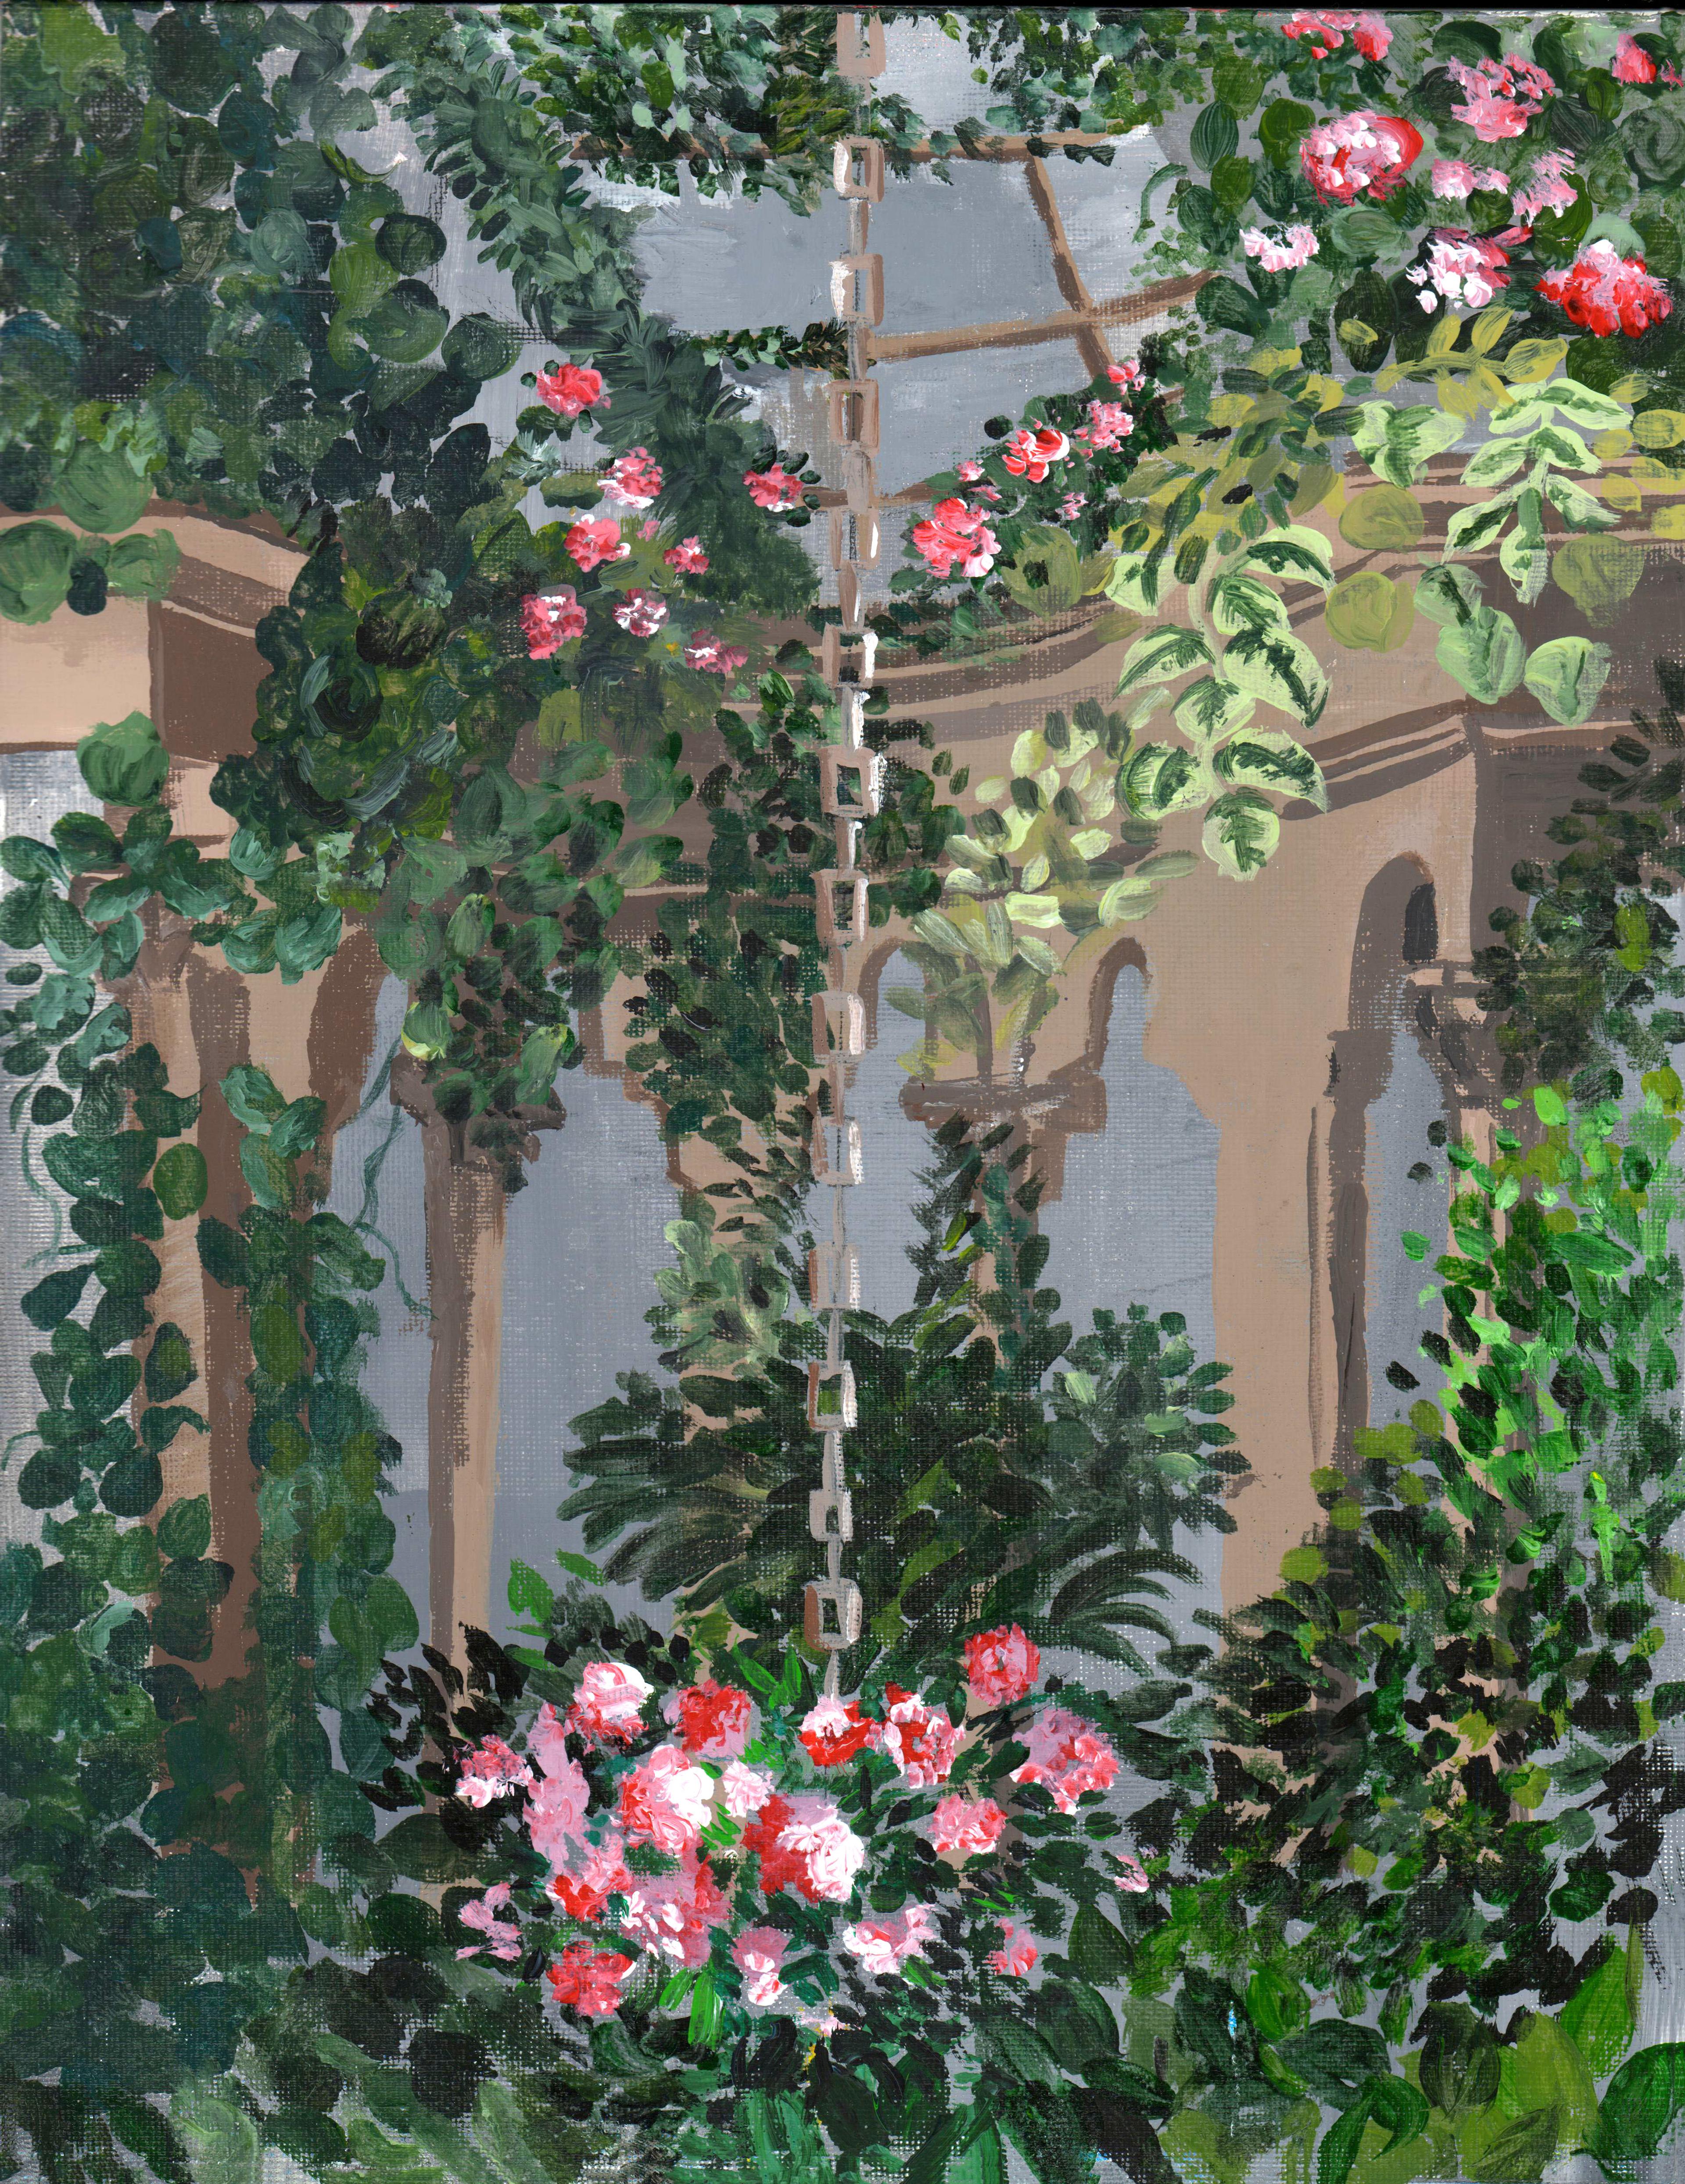 Acrylic painting of the interior of a circular garden gazebo with a glass ceiling and beige pillars supporting the roof. The garden is filled with green hanging plants from top to bottom, and a bouquet of pink flowers in the center hangs near the bottom of the illustration by a long chain that extends from the top of the gazebo.